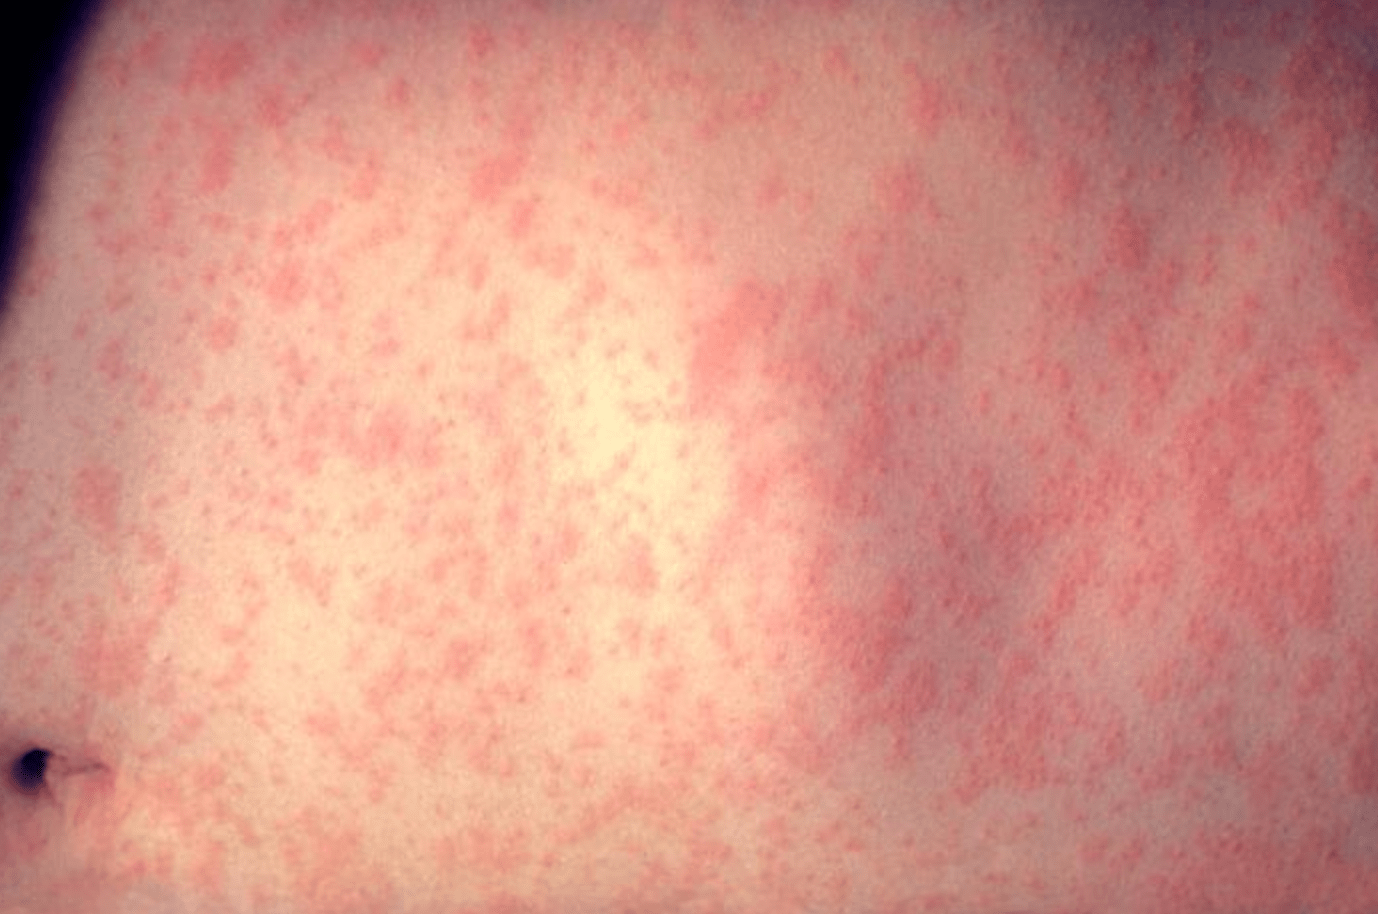 What You Should Know About Measles, After A Case Confirmed In Mass